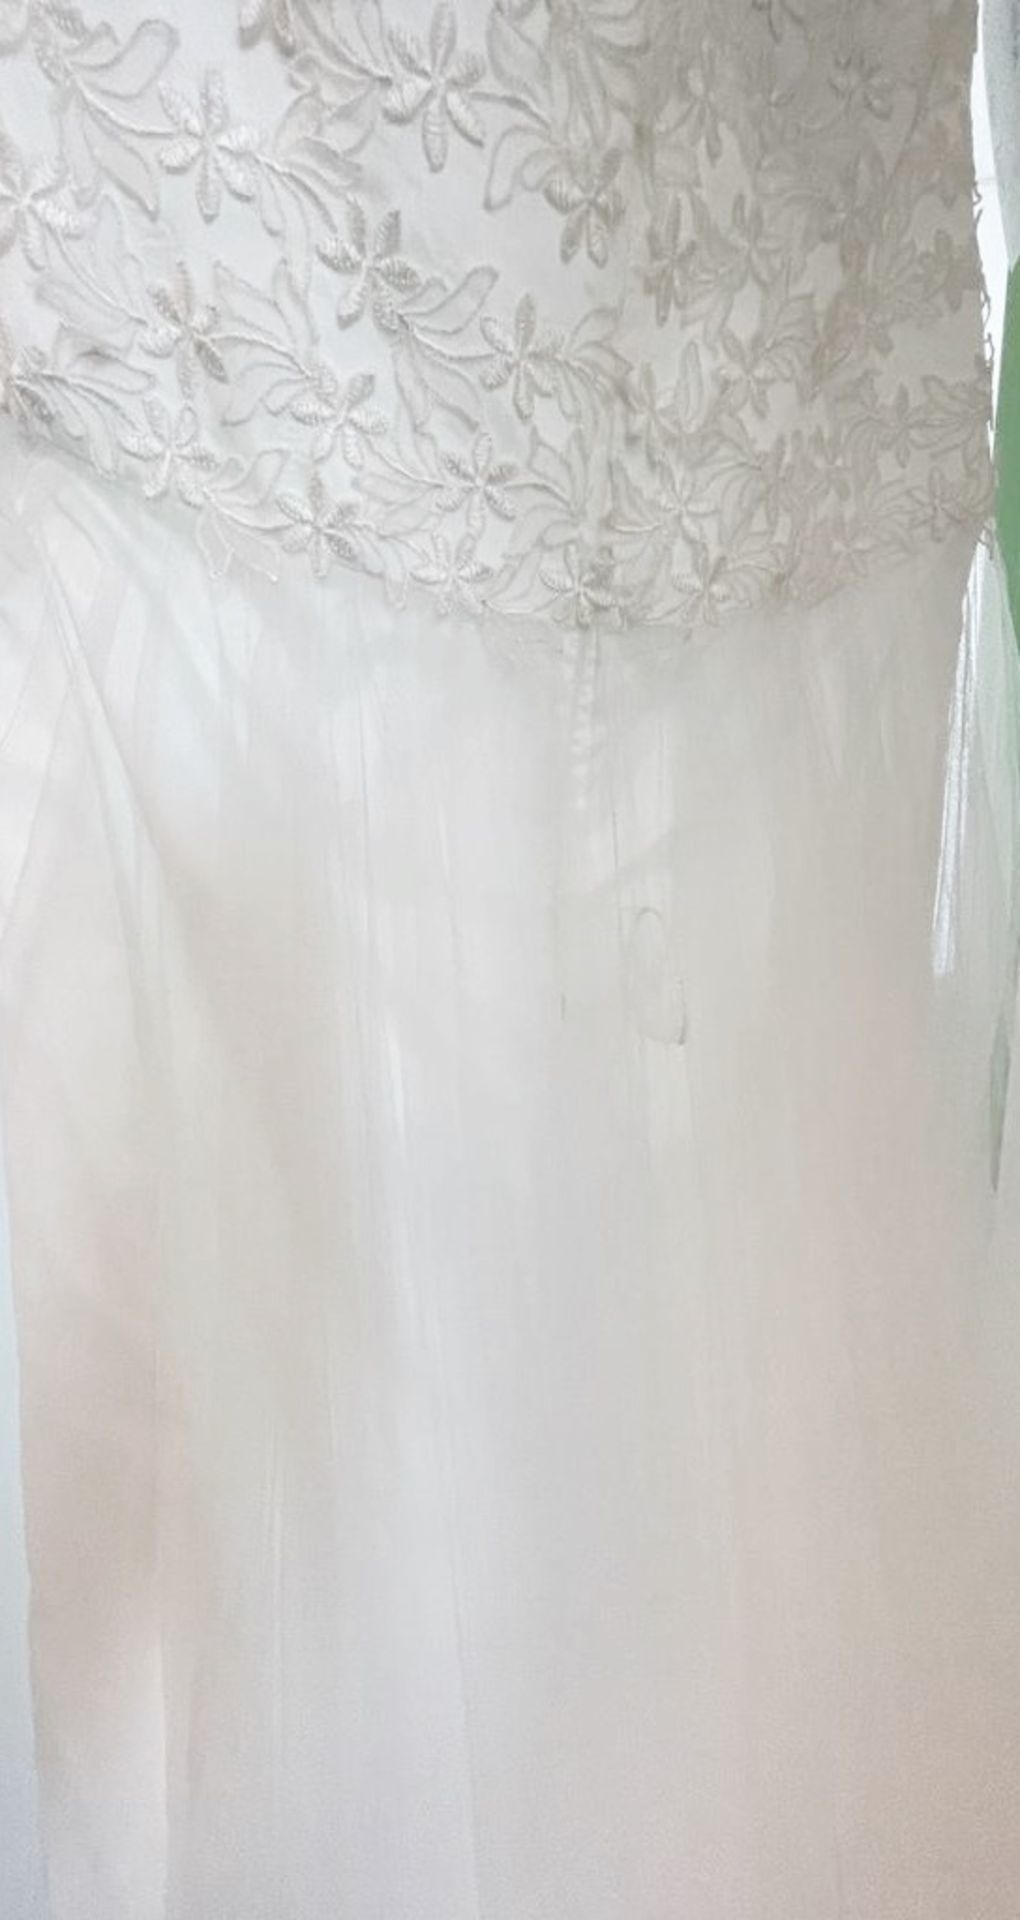 1 x DAVID FIELDEN Strapless Fit And Flare Designer Wedding Dress Bridal Gown, With Lace Top And - Image 6 of 7